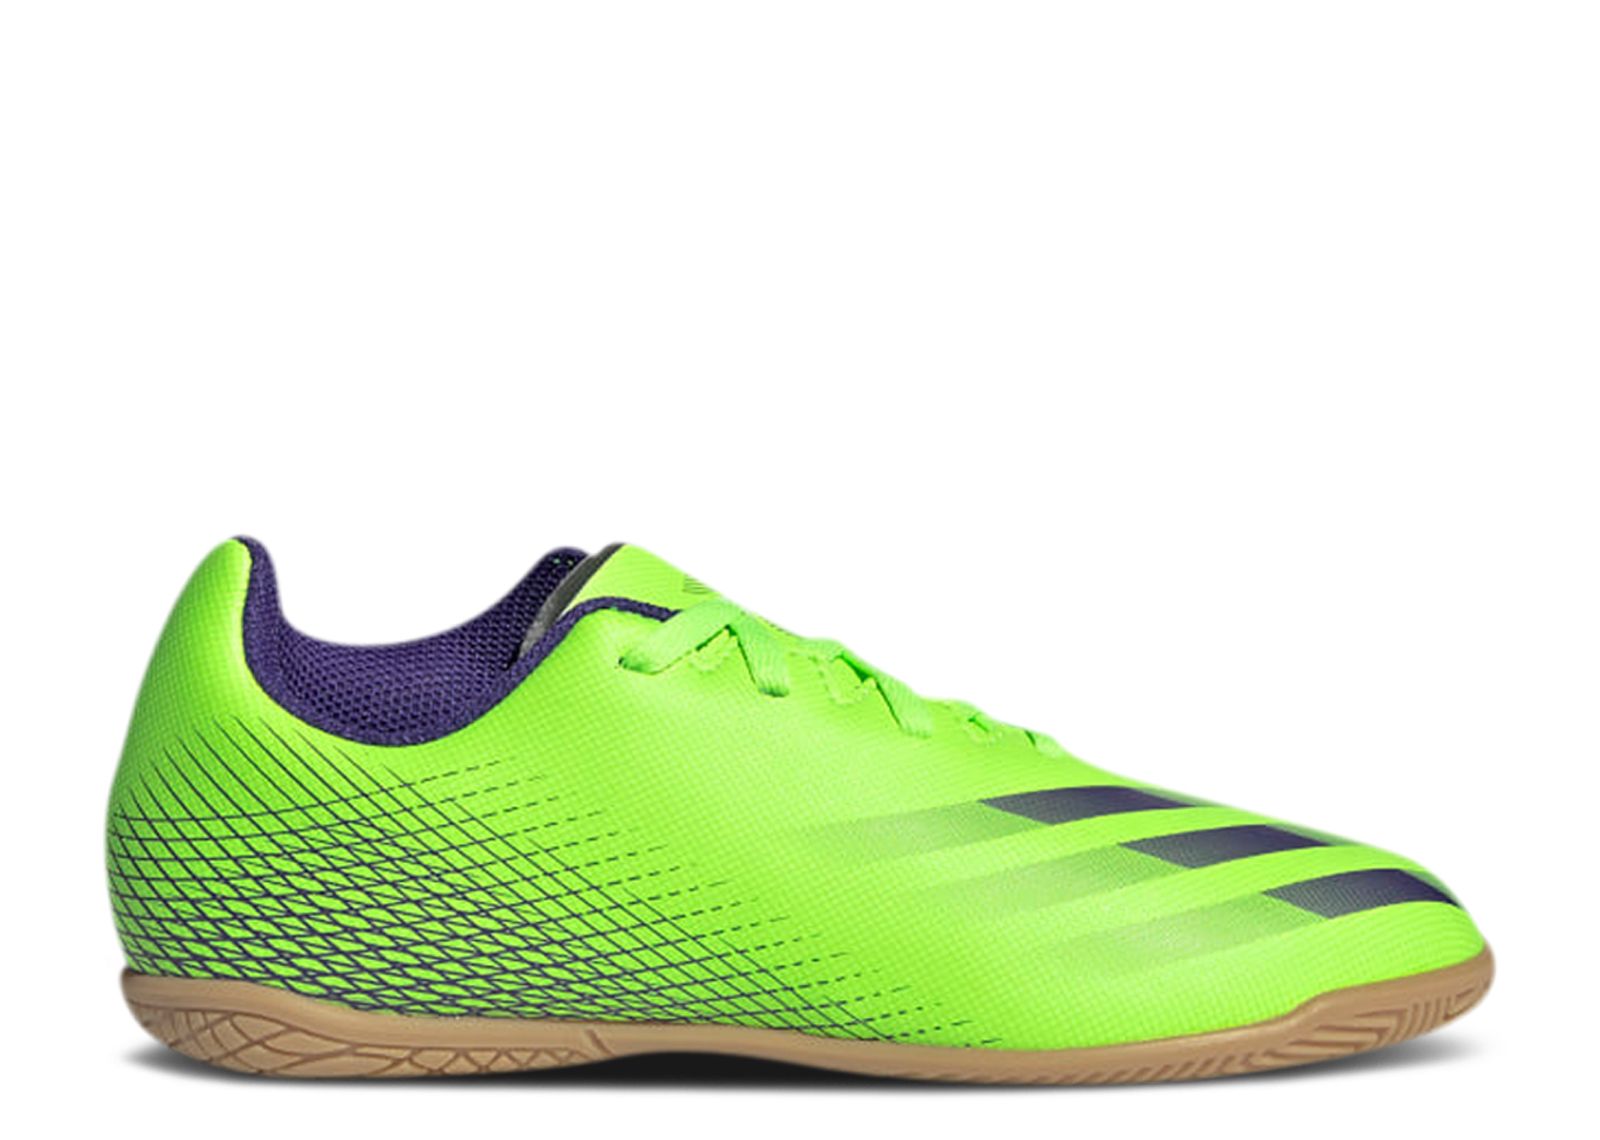 X Ghosted .4 IN J 'Precision To Blur Pack' - Adidas - EG8233 - signal ...